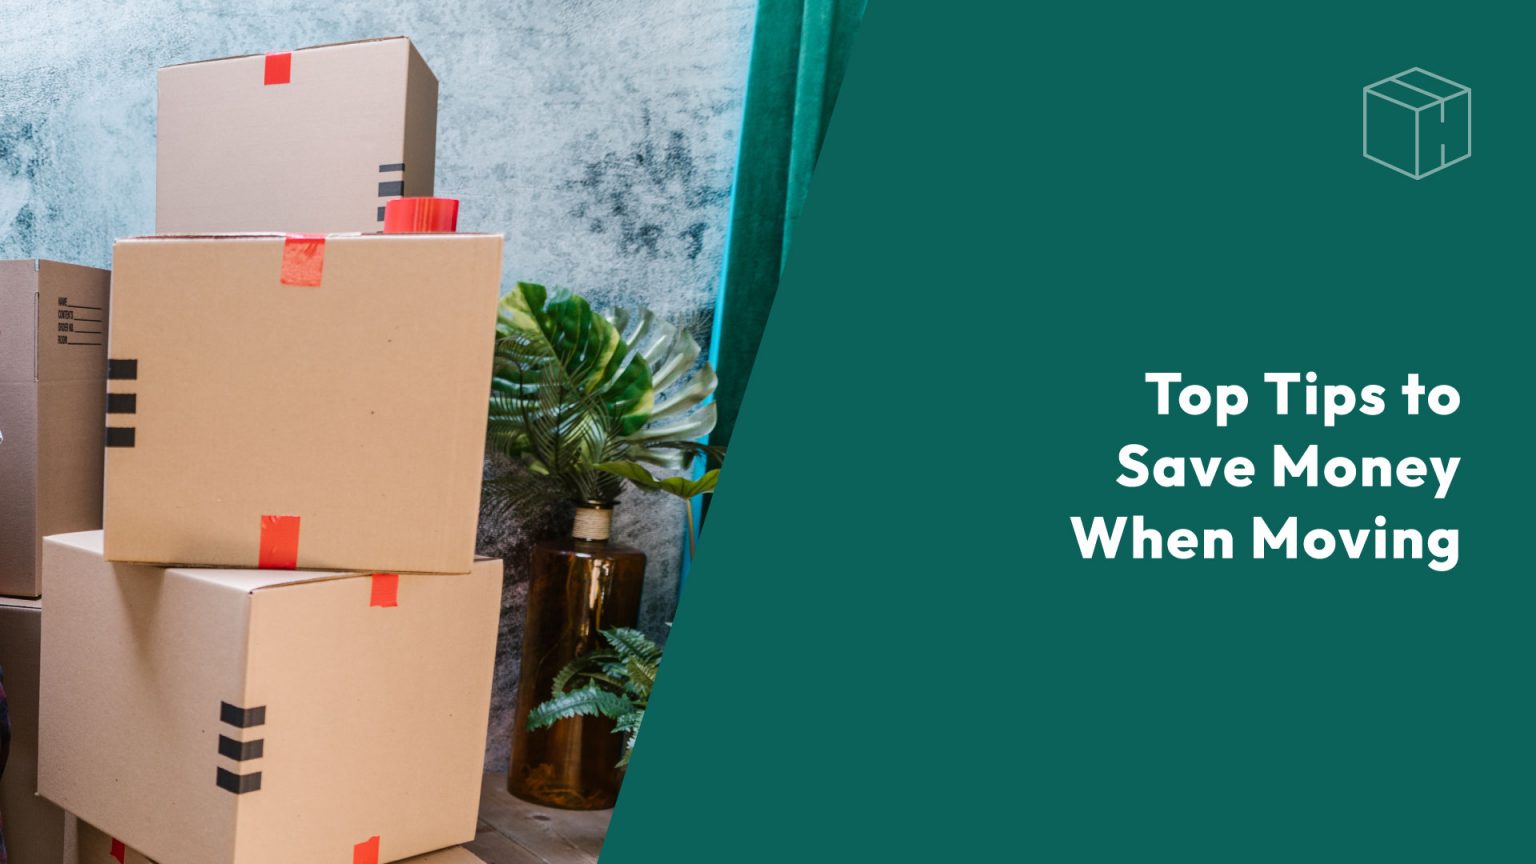 Top Tips to Save Money When Moving